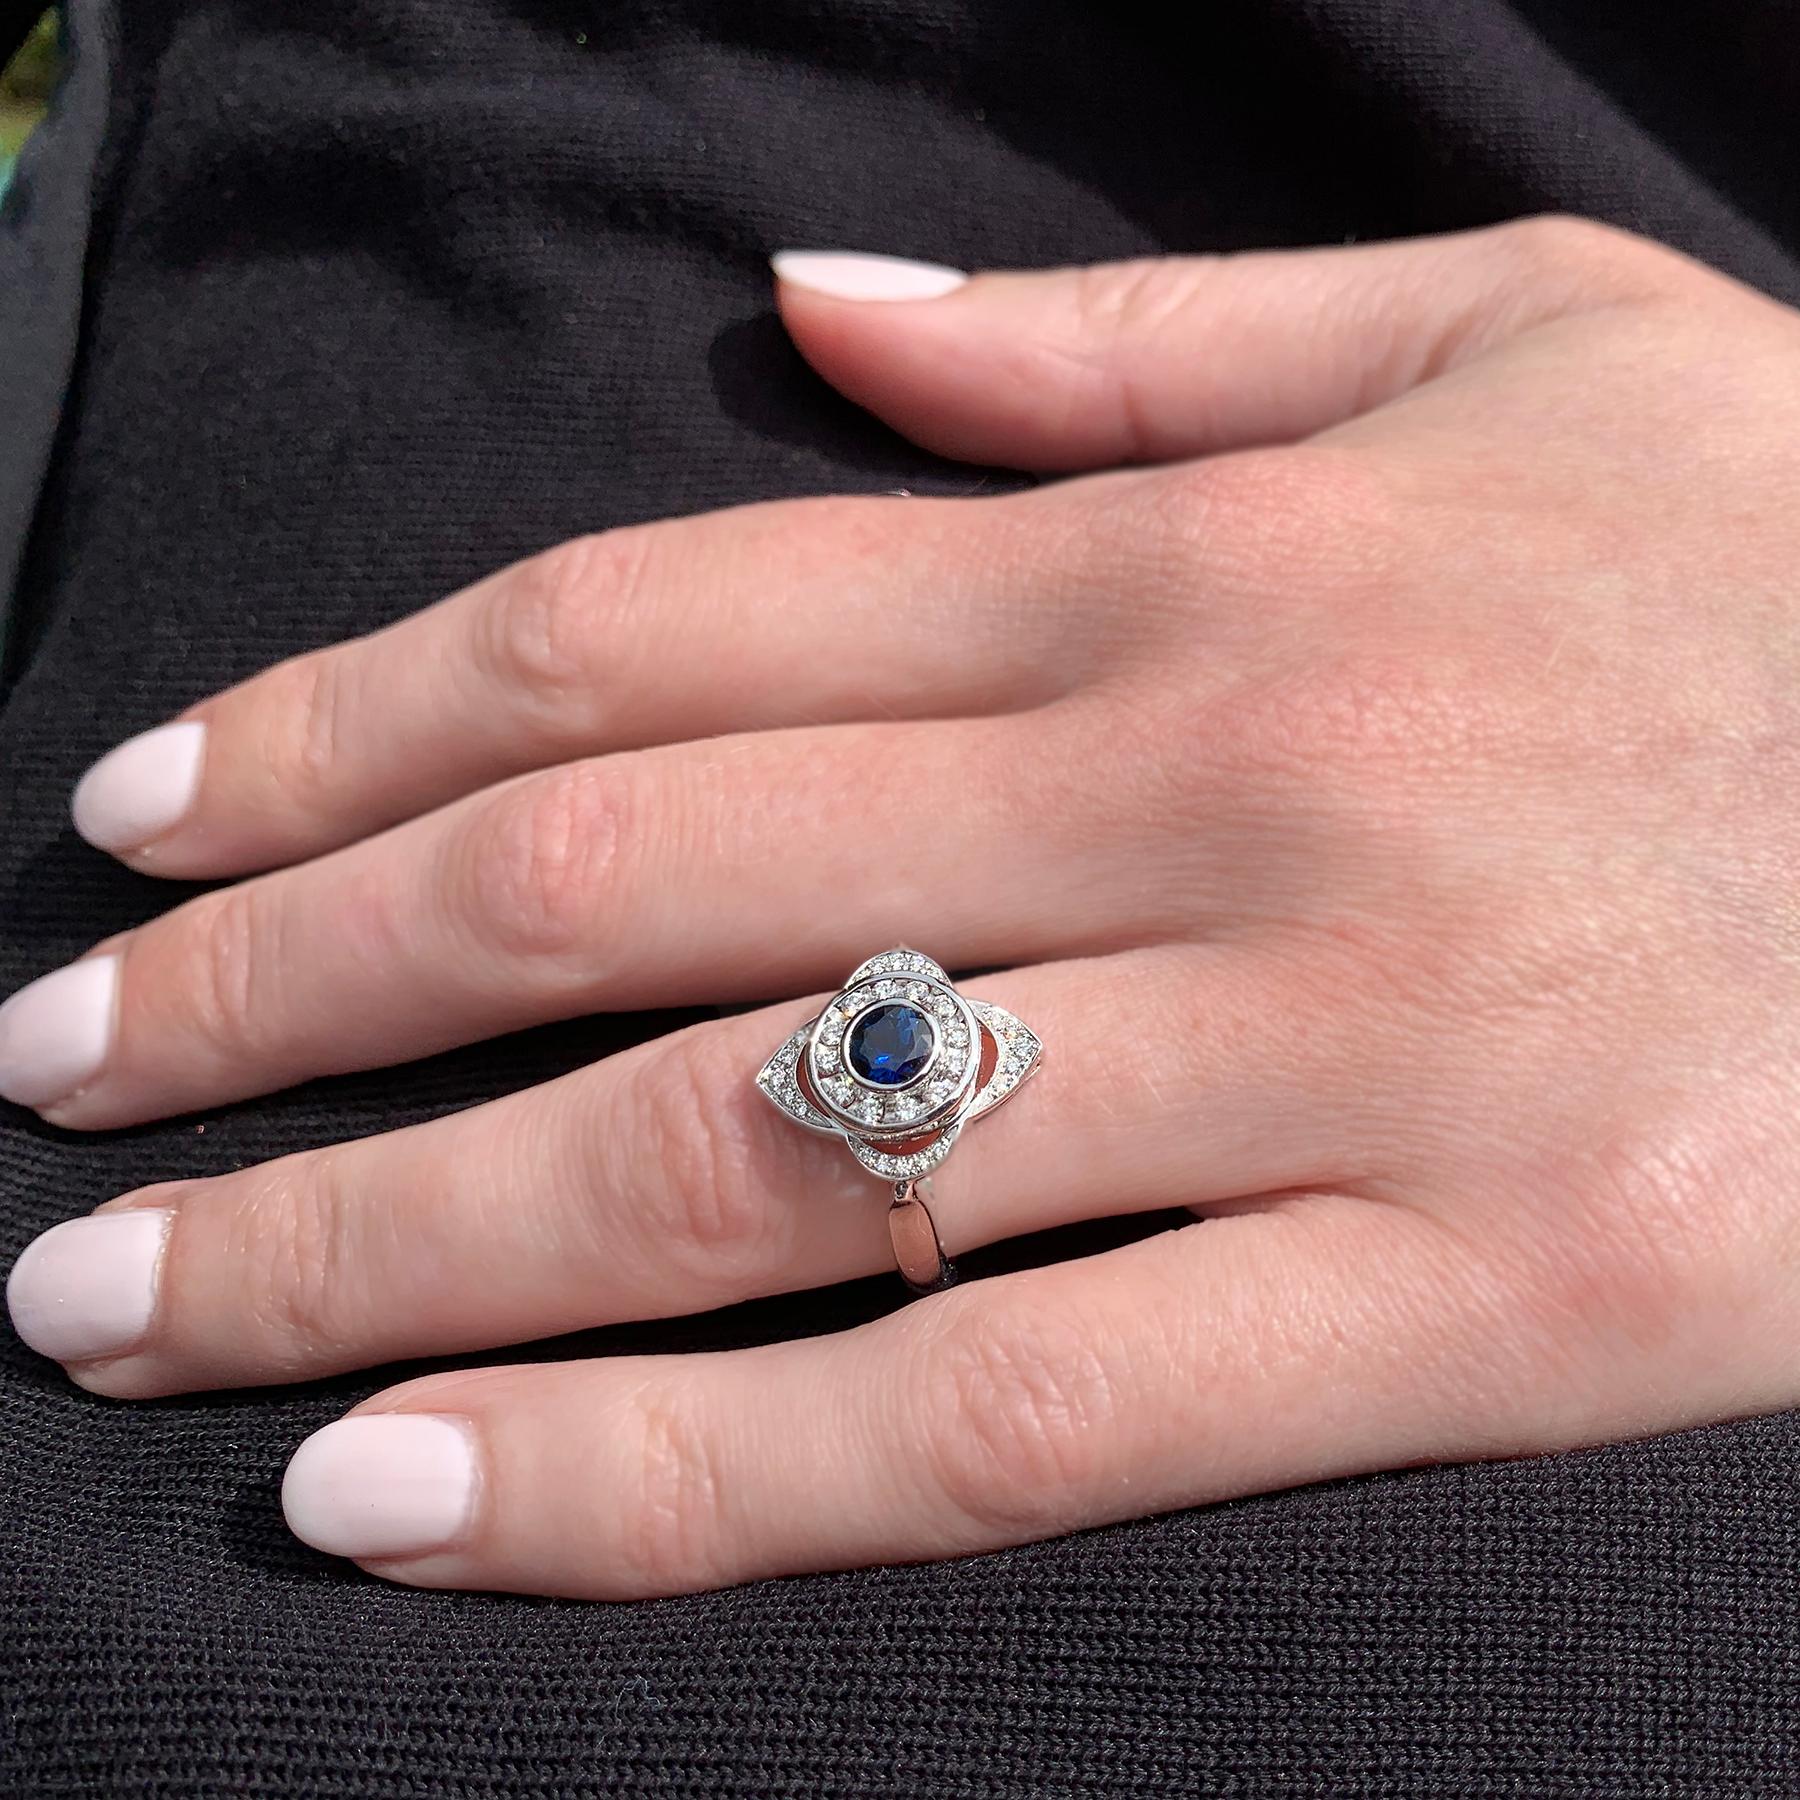 This exquisite sapphire and diamond ring could be an alternative engagement ring or a dress ring. A vibrant round cut blue sapphire is neatly bezel set and surrounded by exquisite round brilliant cut diamonds.

1 Deep blue round cut sapphire 4.8mm